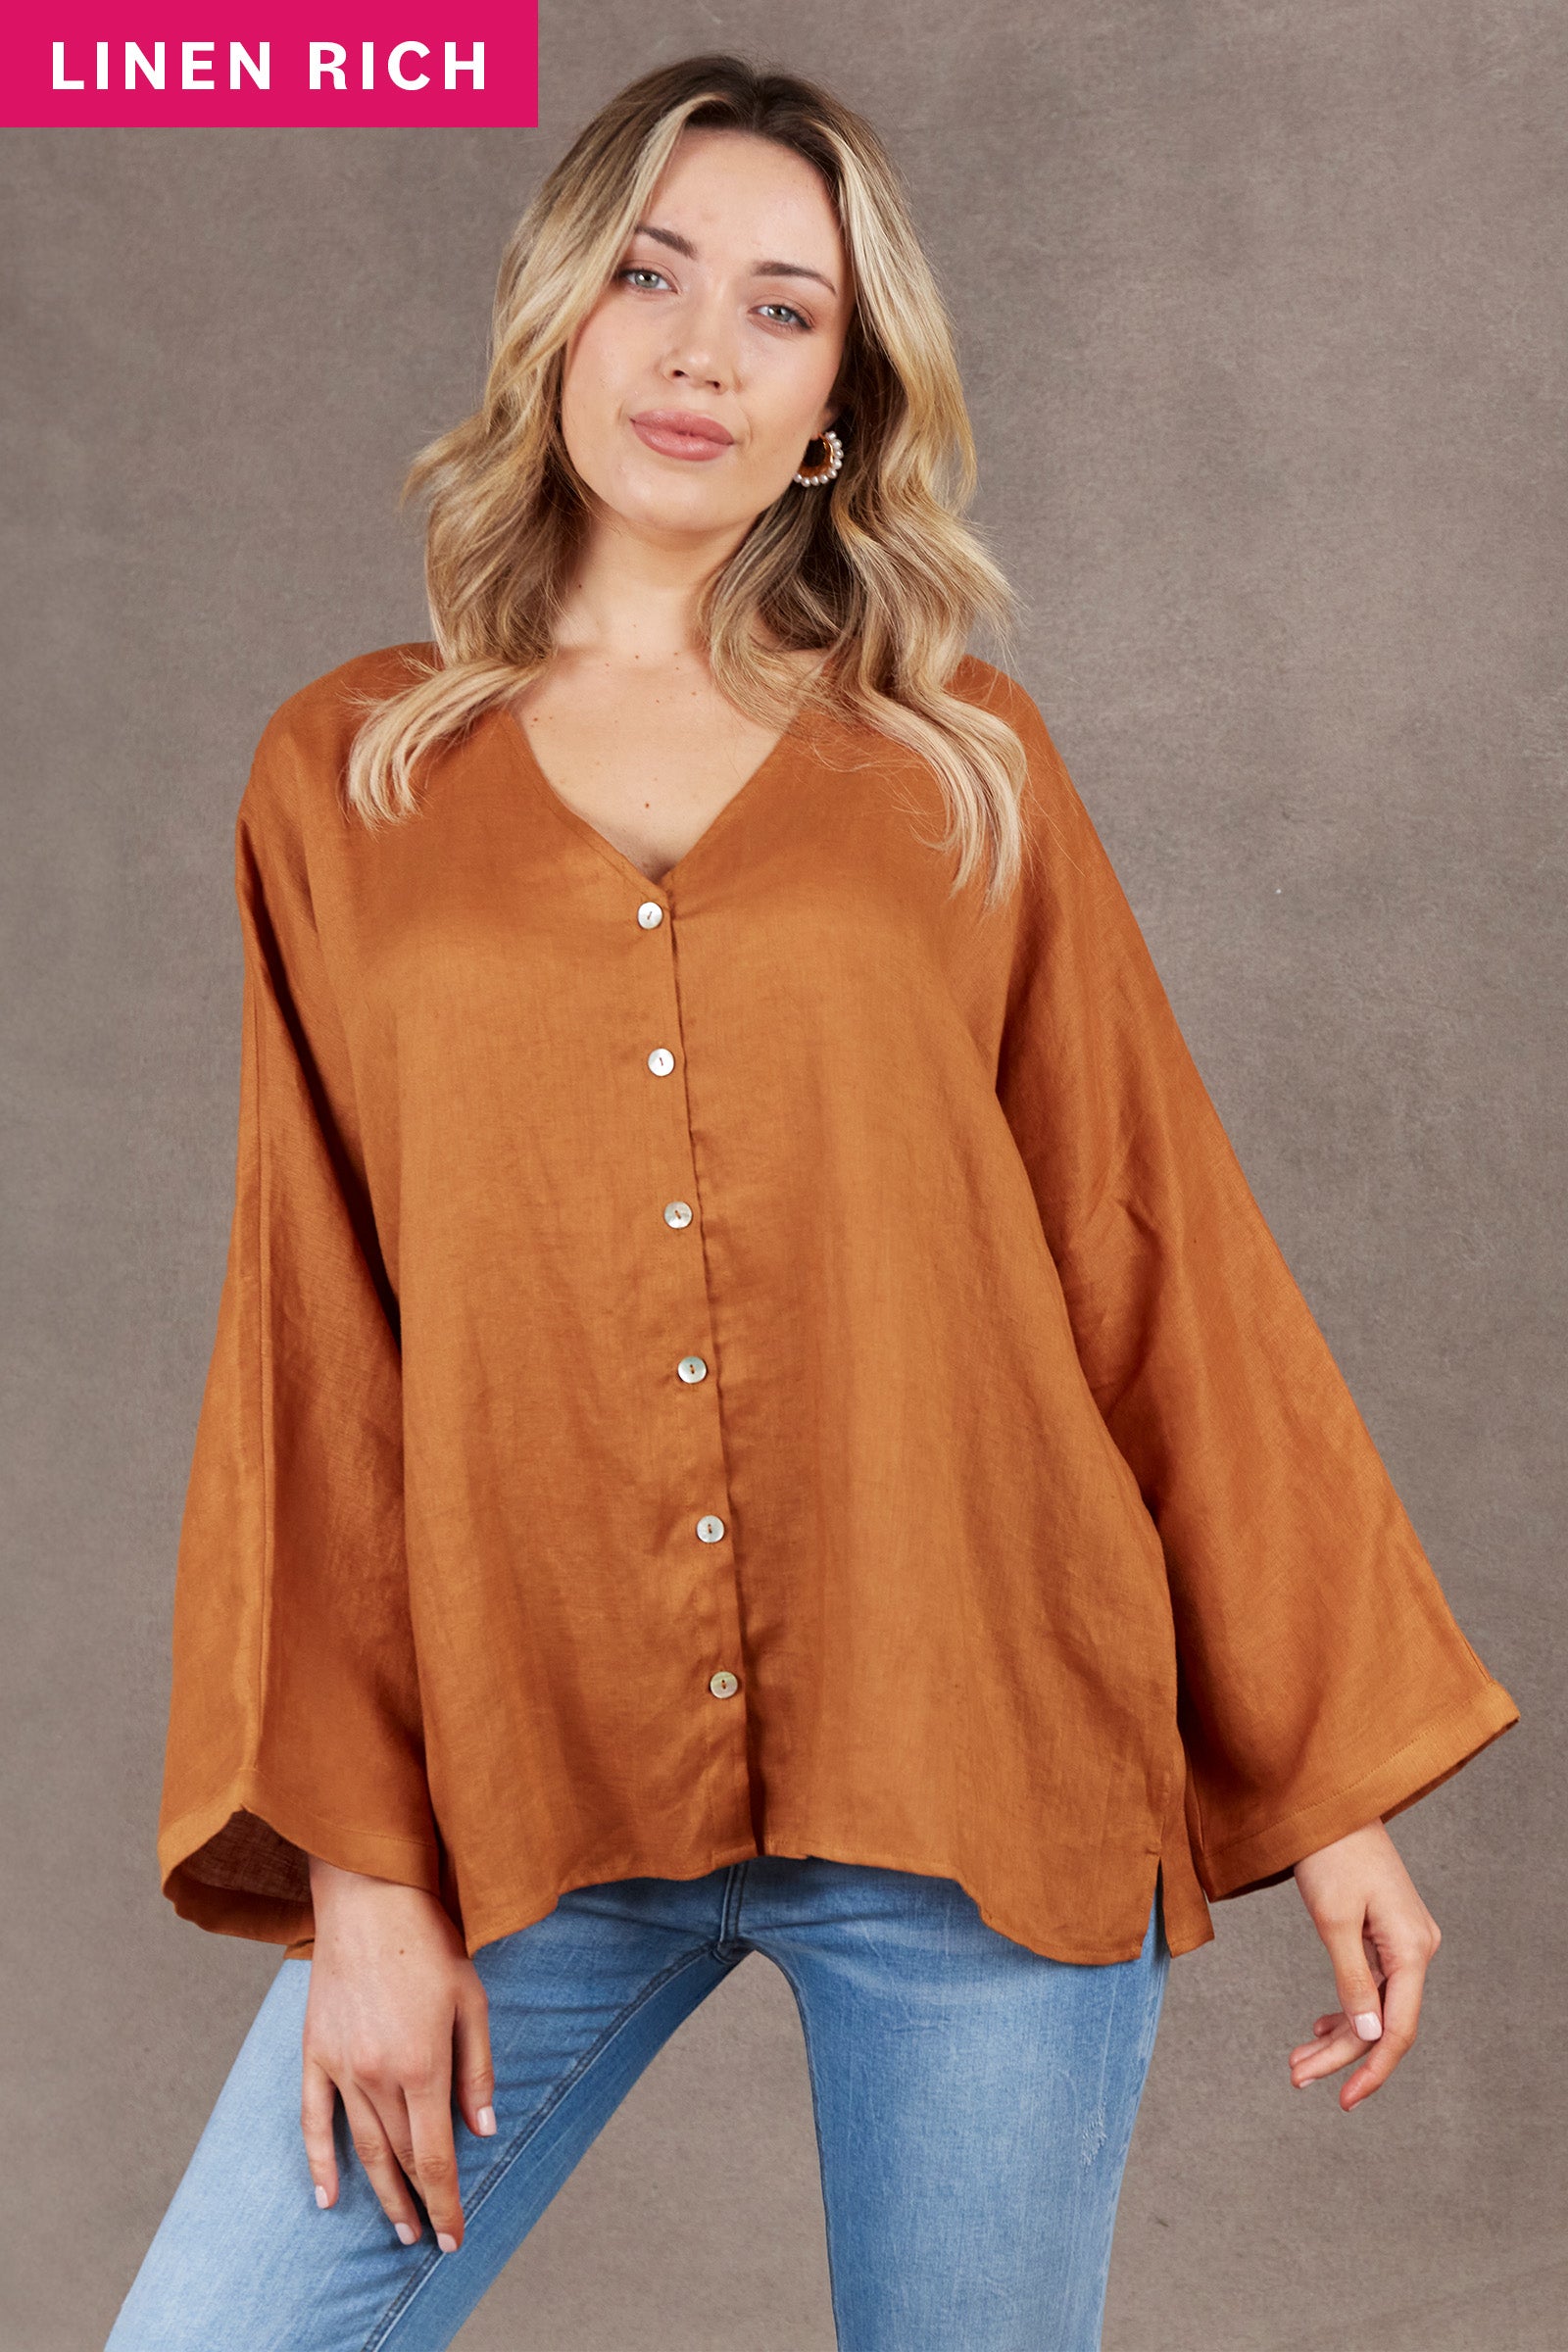 Nama Relax Top - Ochre - eb&ive Clothing - Top L/S Linen One Size